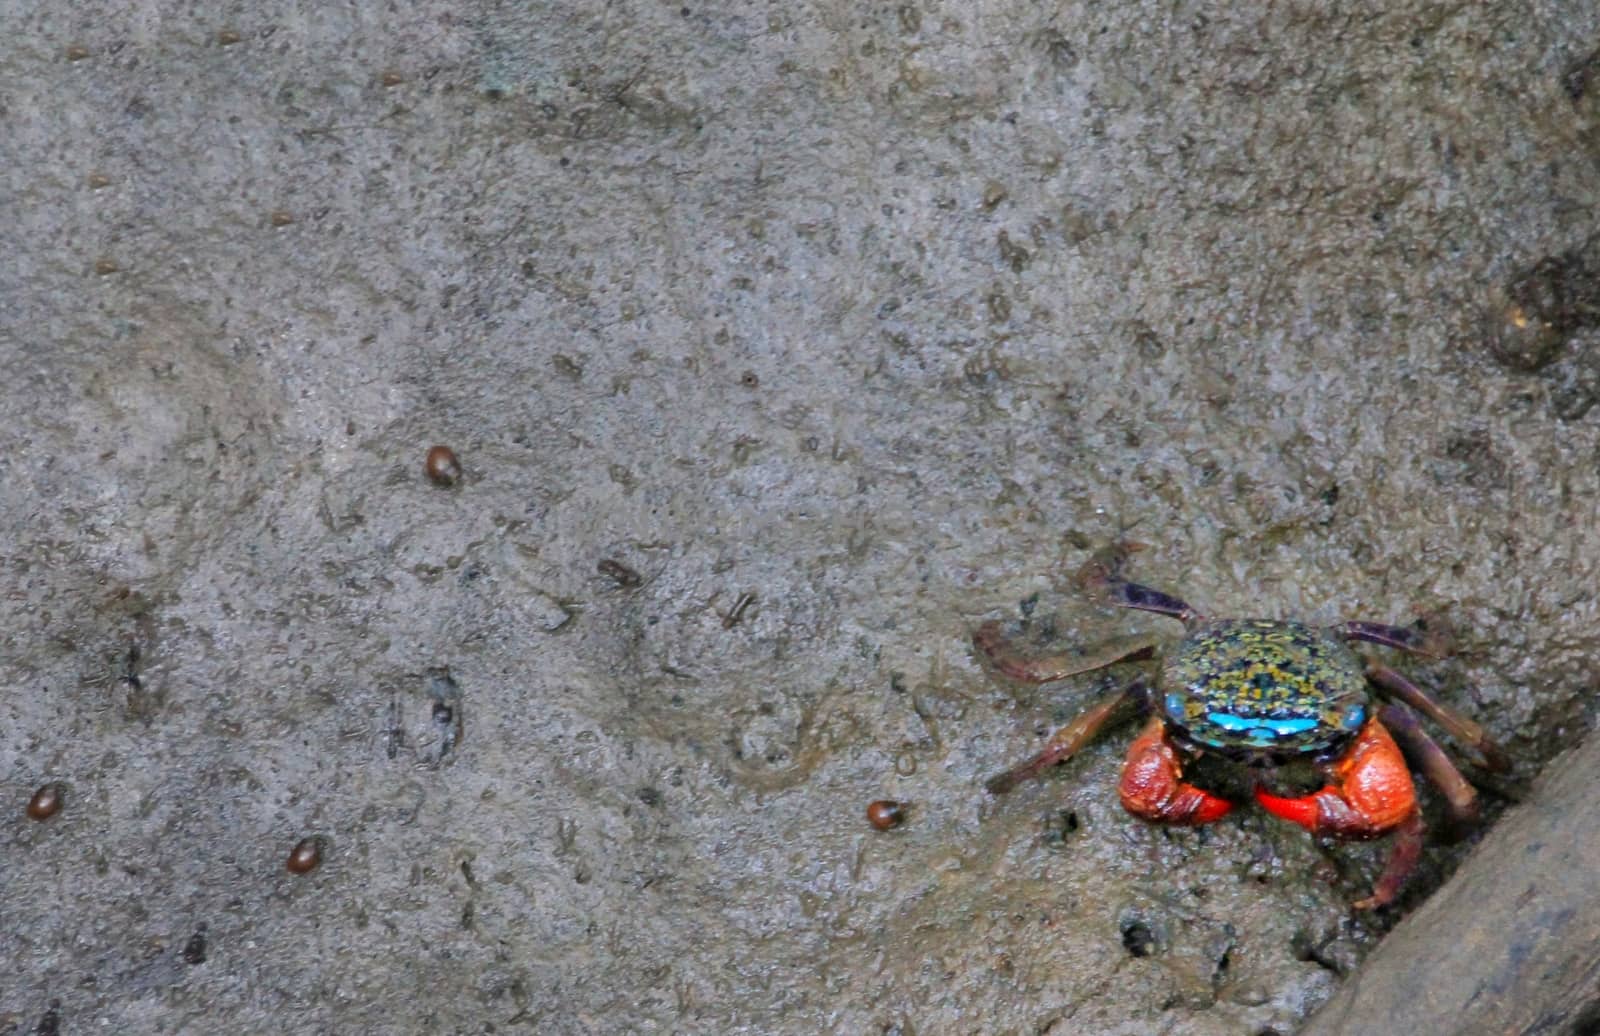 Uca tetragonon, a species of fiddler crab commonly found in mangrove areas by Sonnet15